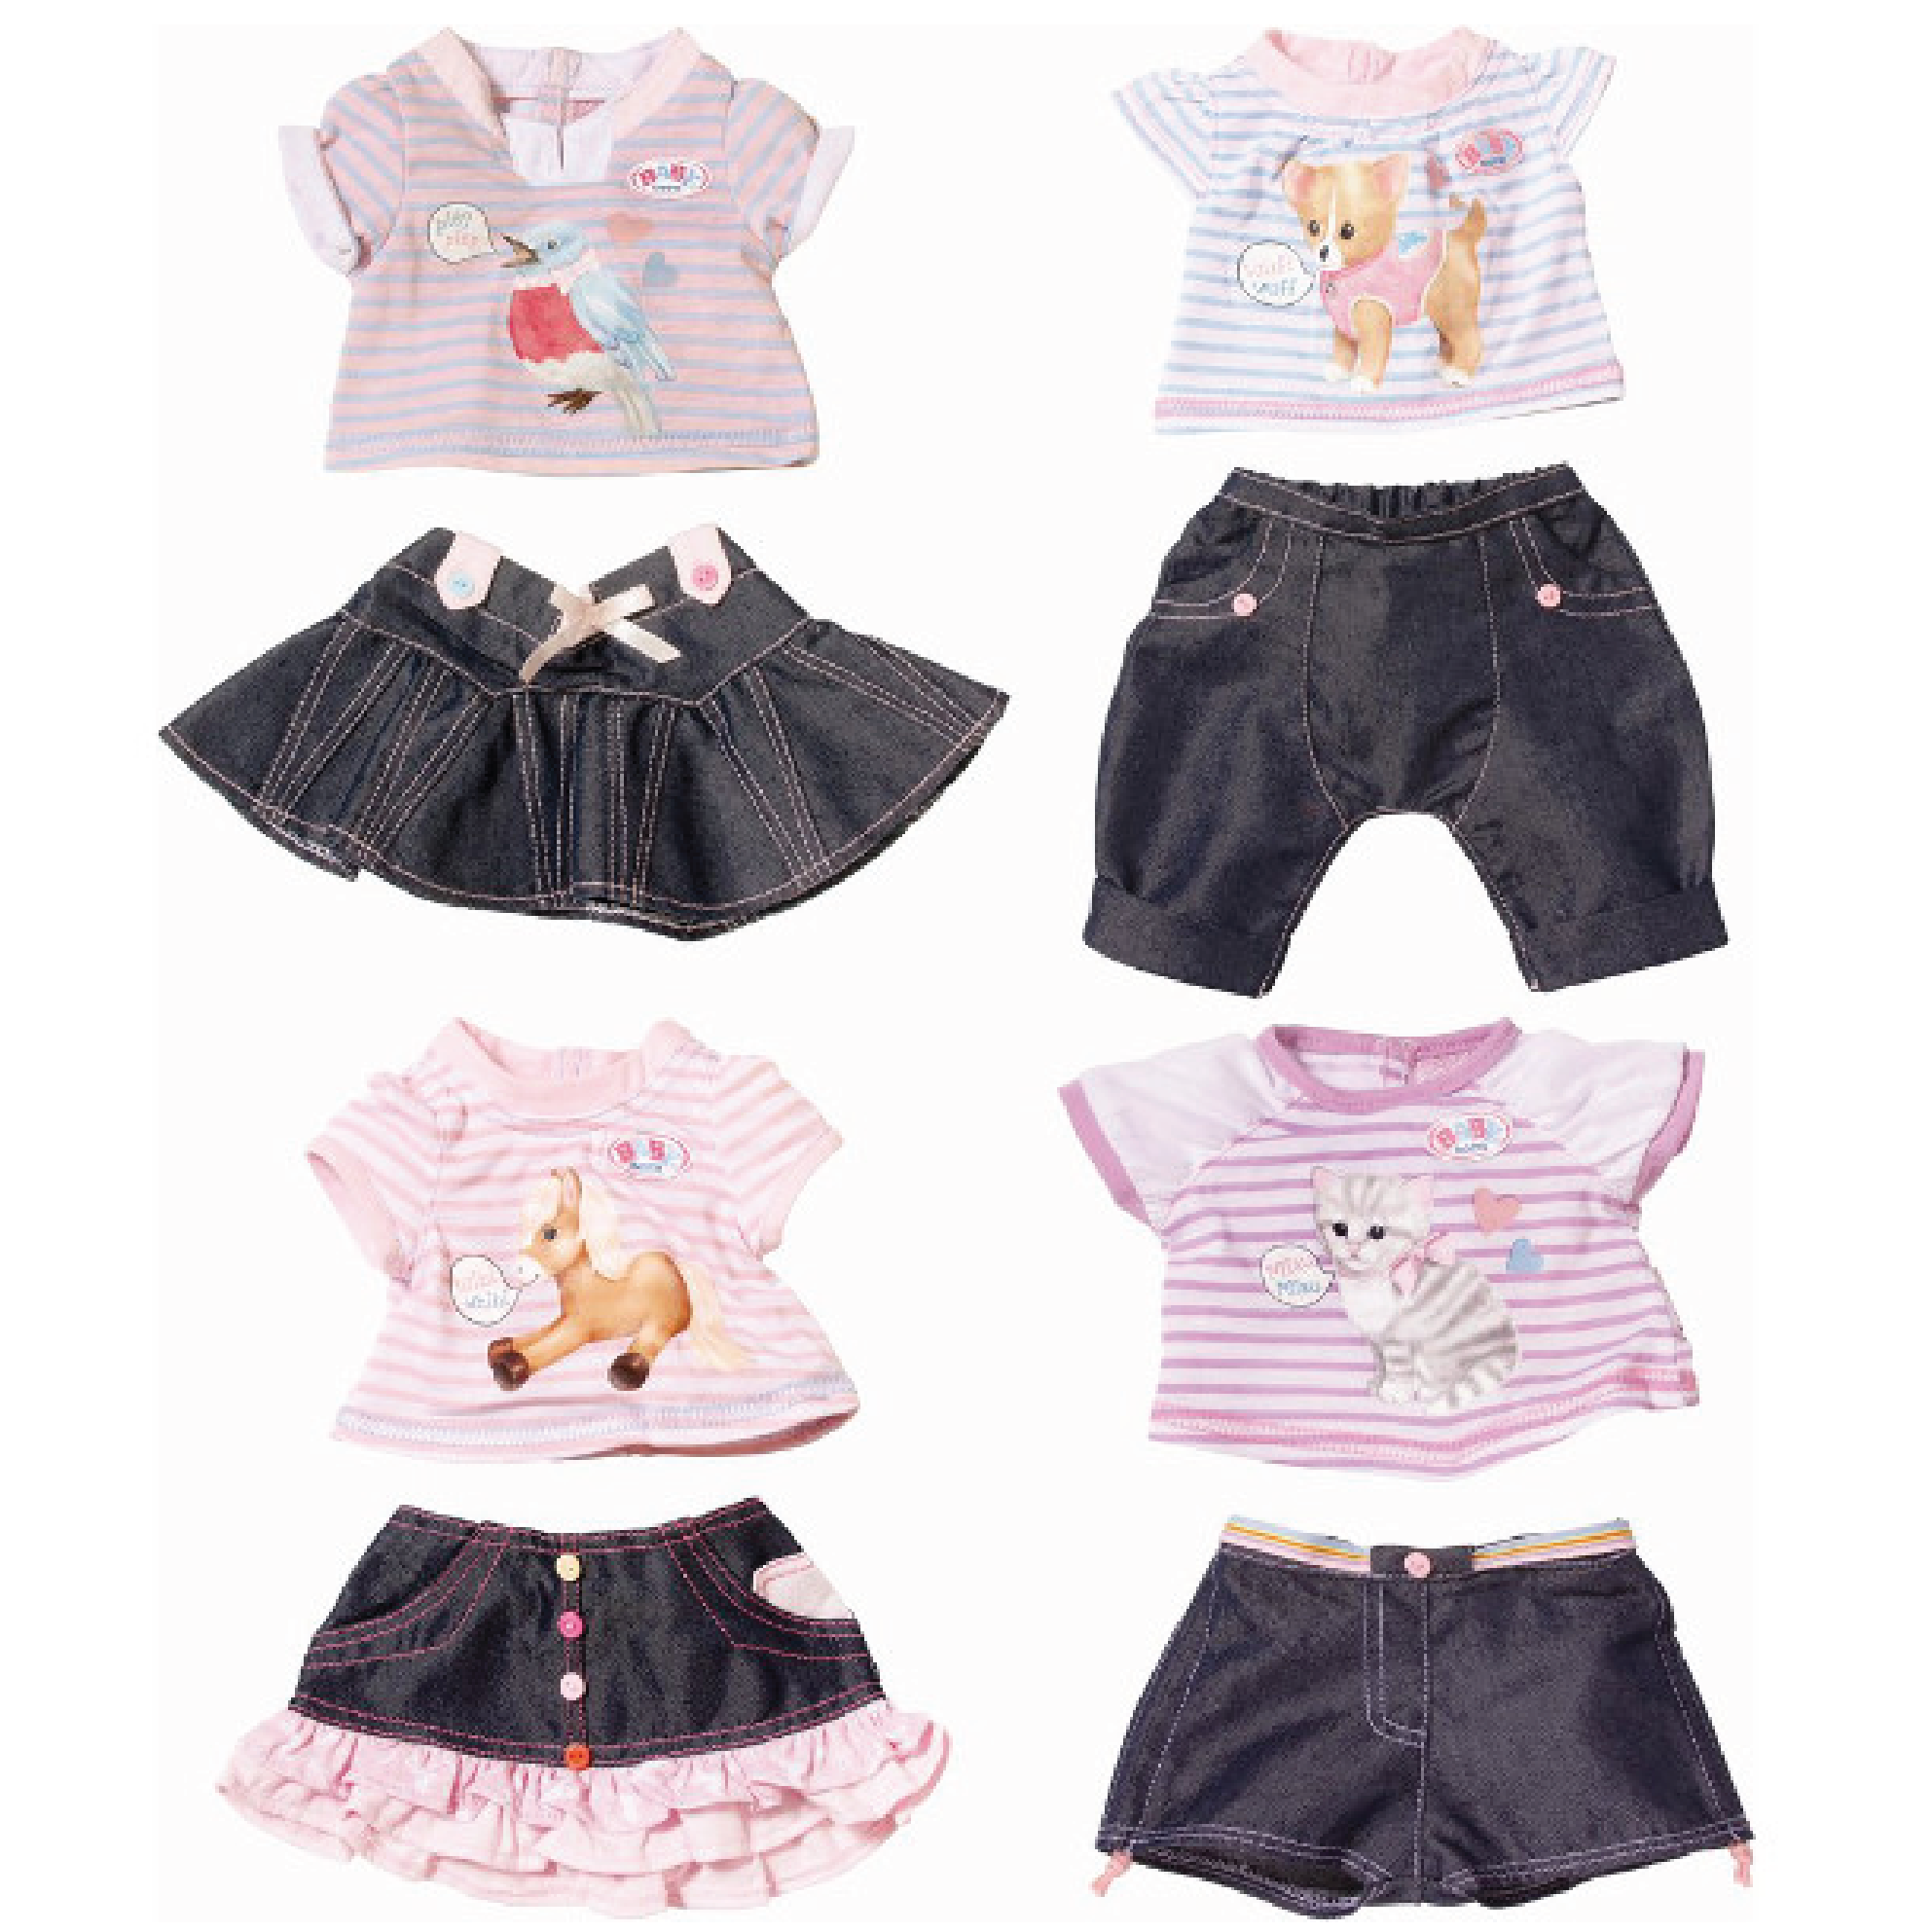 Baby Born Deluxe Outfits with Animal Sounds, Cat